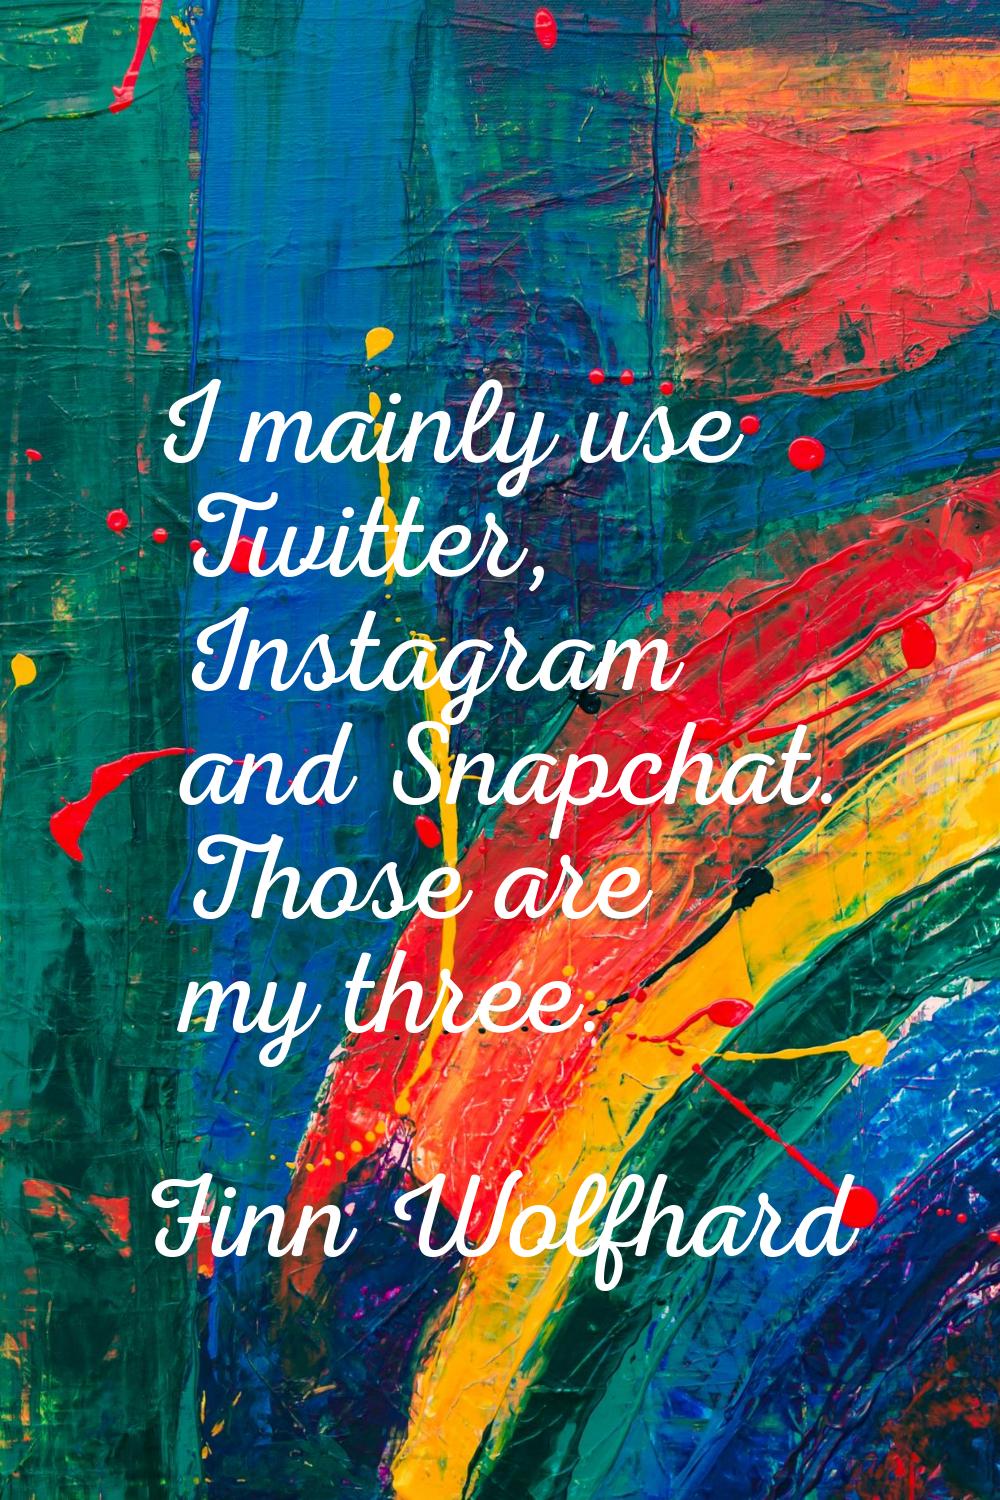 I mainly use Twitter, Instagram and Snapchat. Those are my three.